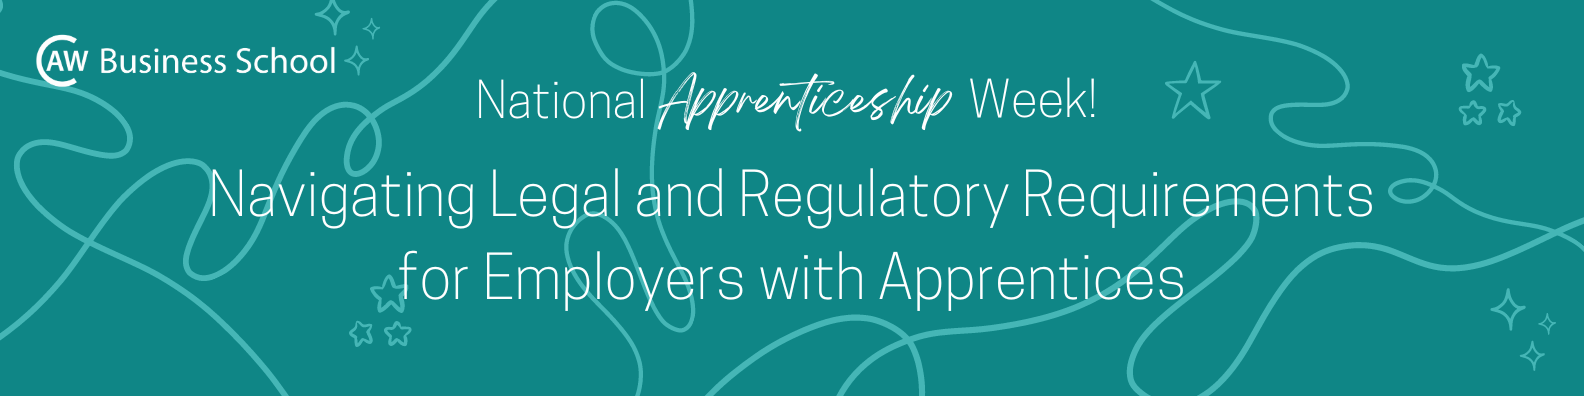 Navigating Legal and Regulatory Requirements for Employers with Apprentices